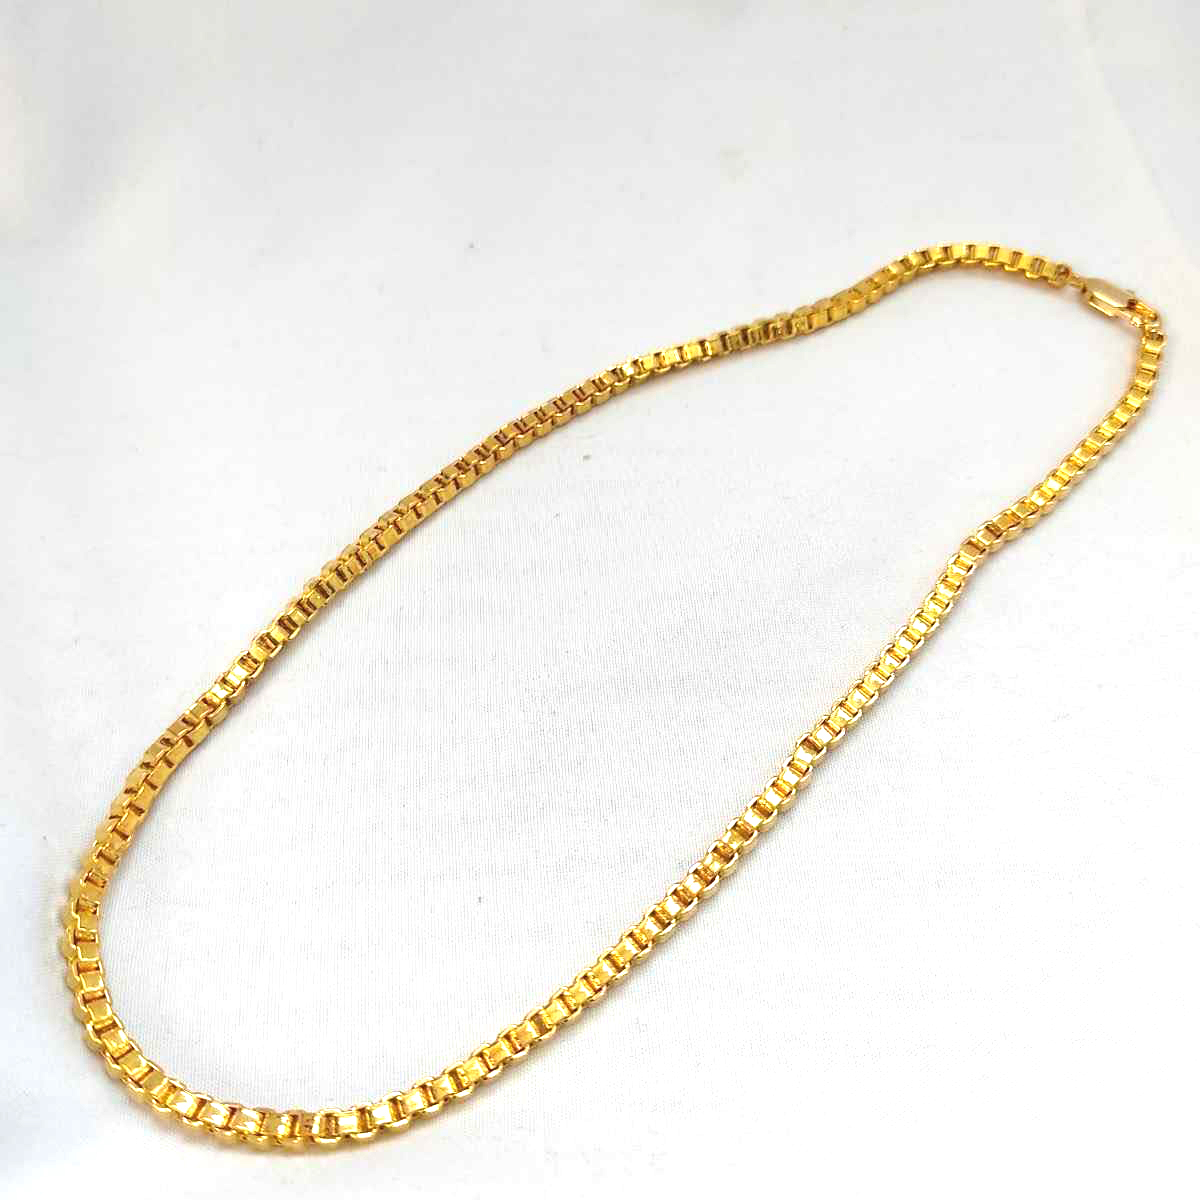 men's necklace GOLD chain 18k 刻印 ゴールドネックレス 金ネックレス 18kgp 鍍金 307_画像2